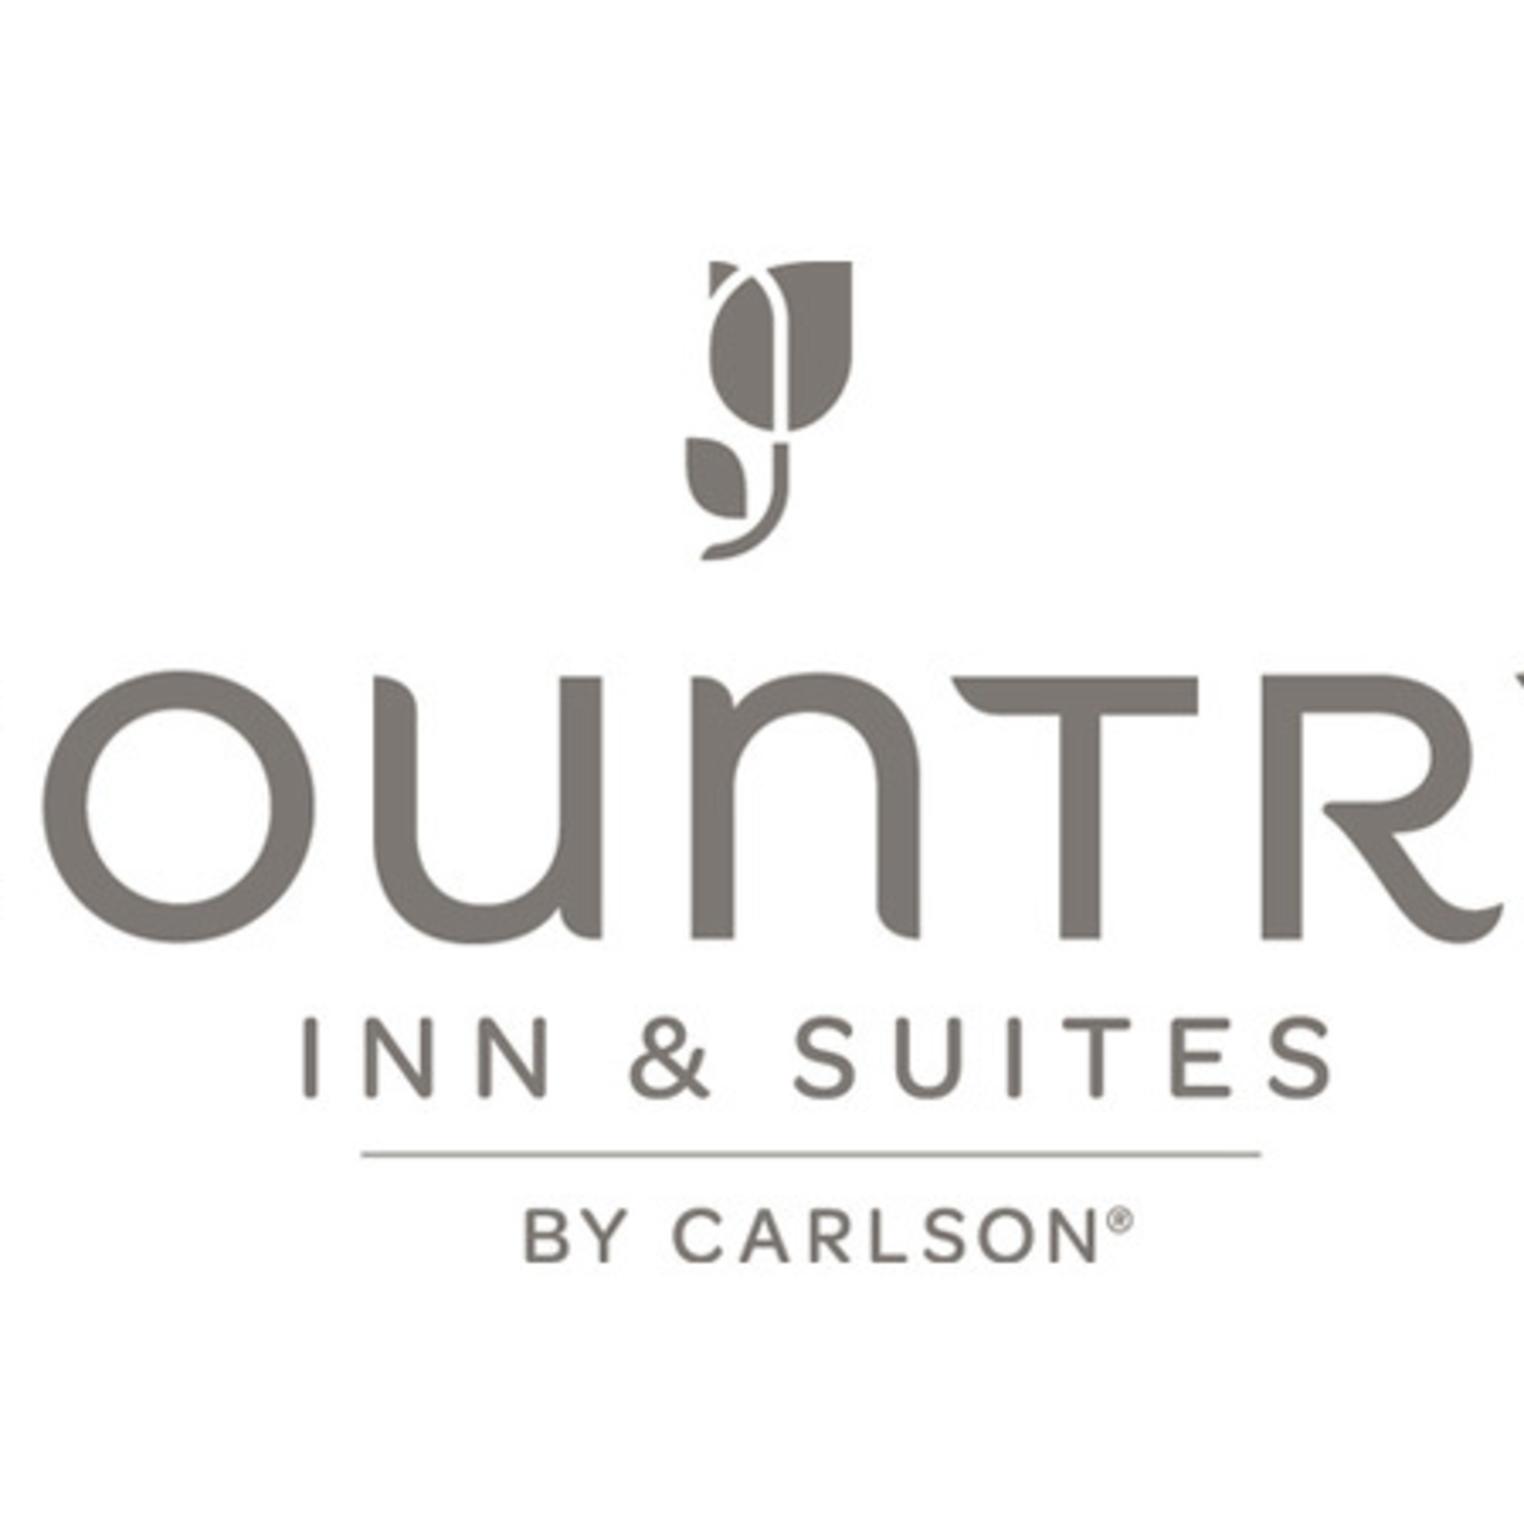 Country Inn and Suites 2013 Logo